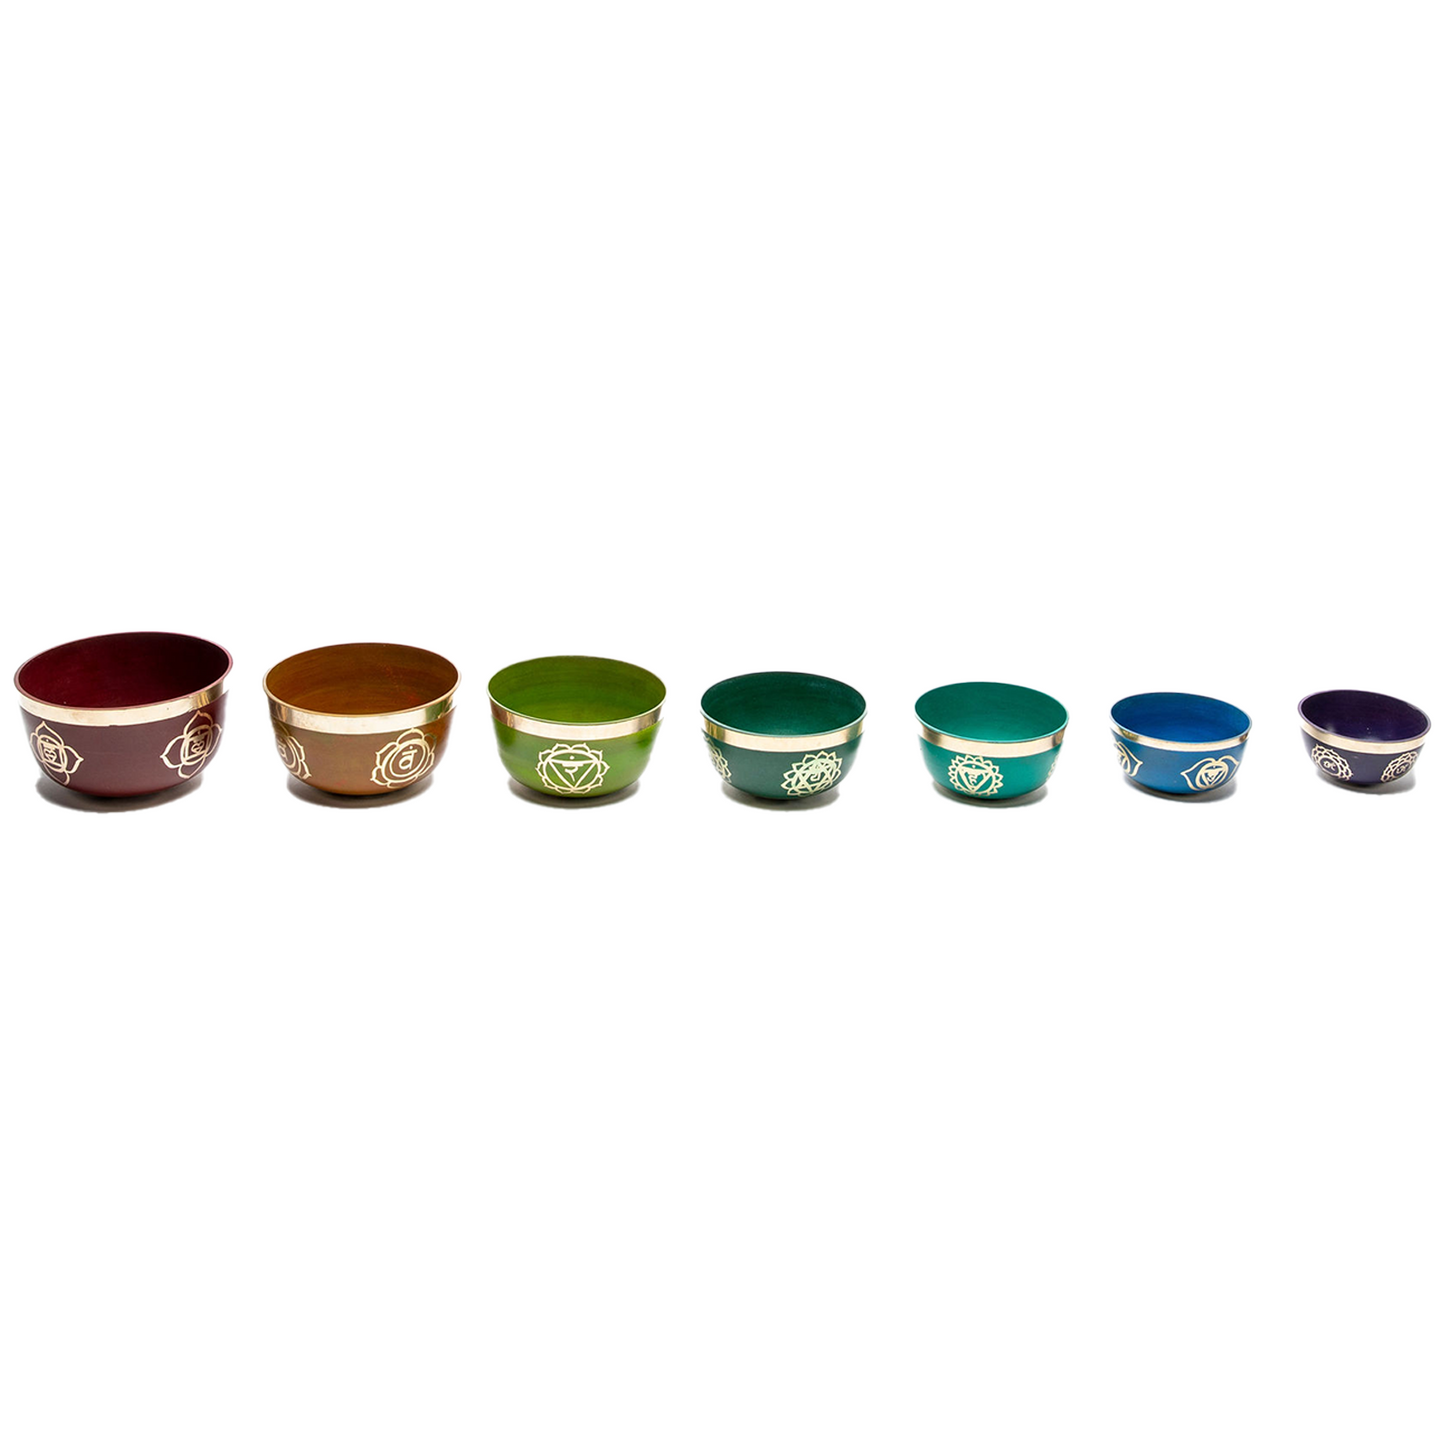 The Chakra 7 Bowl Set is lined up evenly against a solid white backdrop. It is a top/ side angle of the bowls that are lined from left to right, largest to smallest.